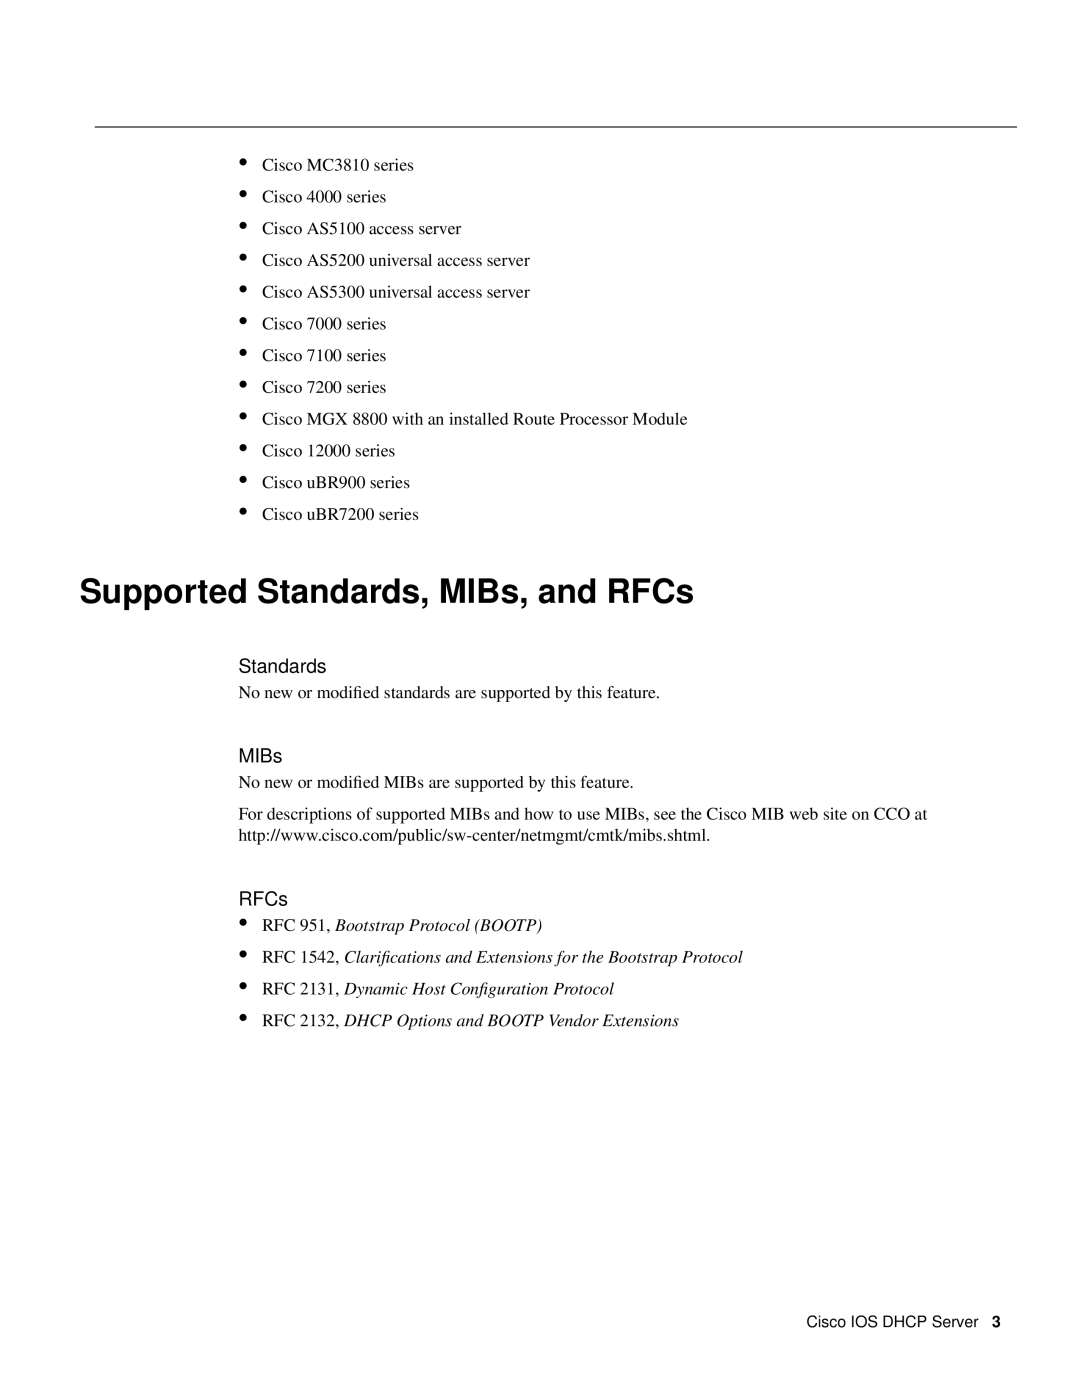 Cisco Systems 32369 manual Supported Standards, MIBs, and RFCs, RFC 951, Bootstrap Protocol BOOTP 